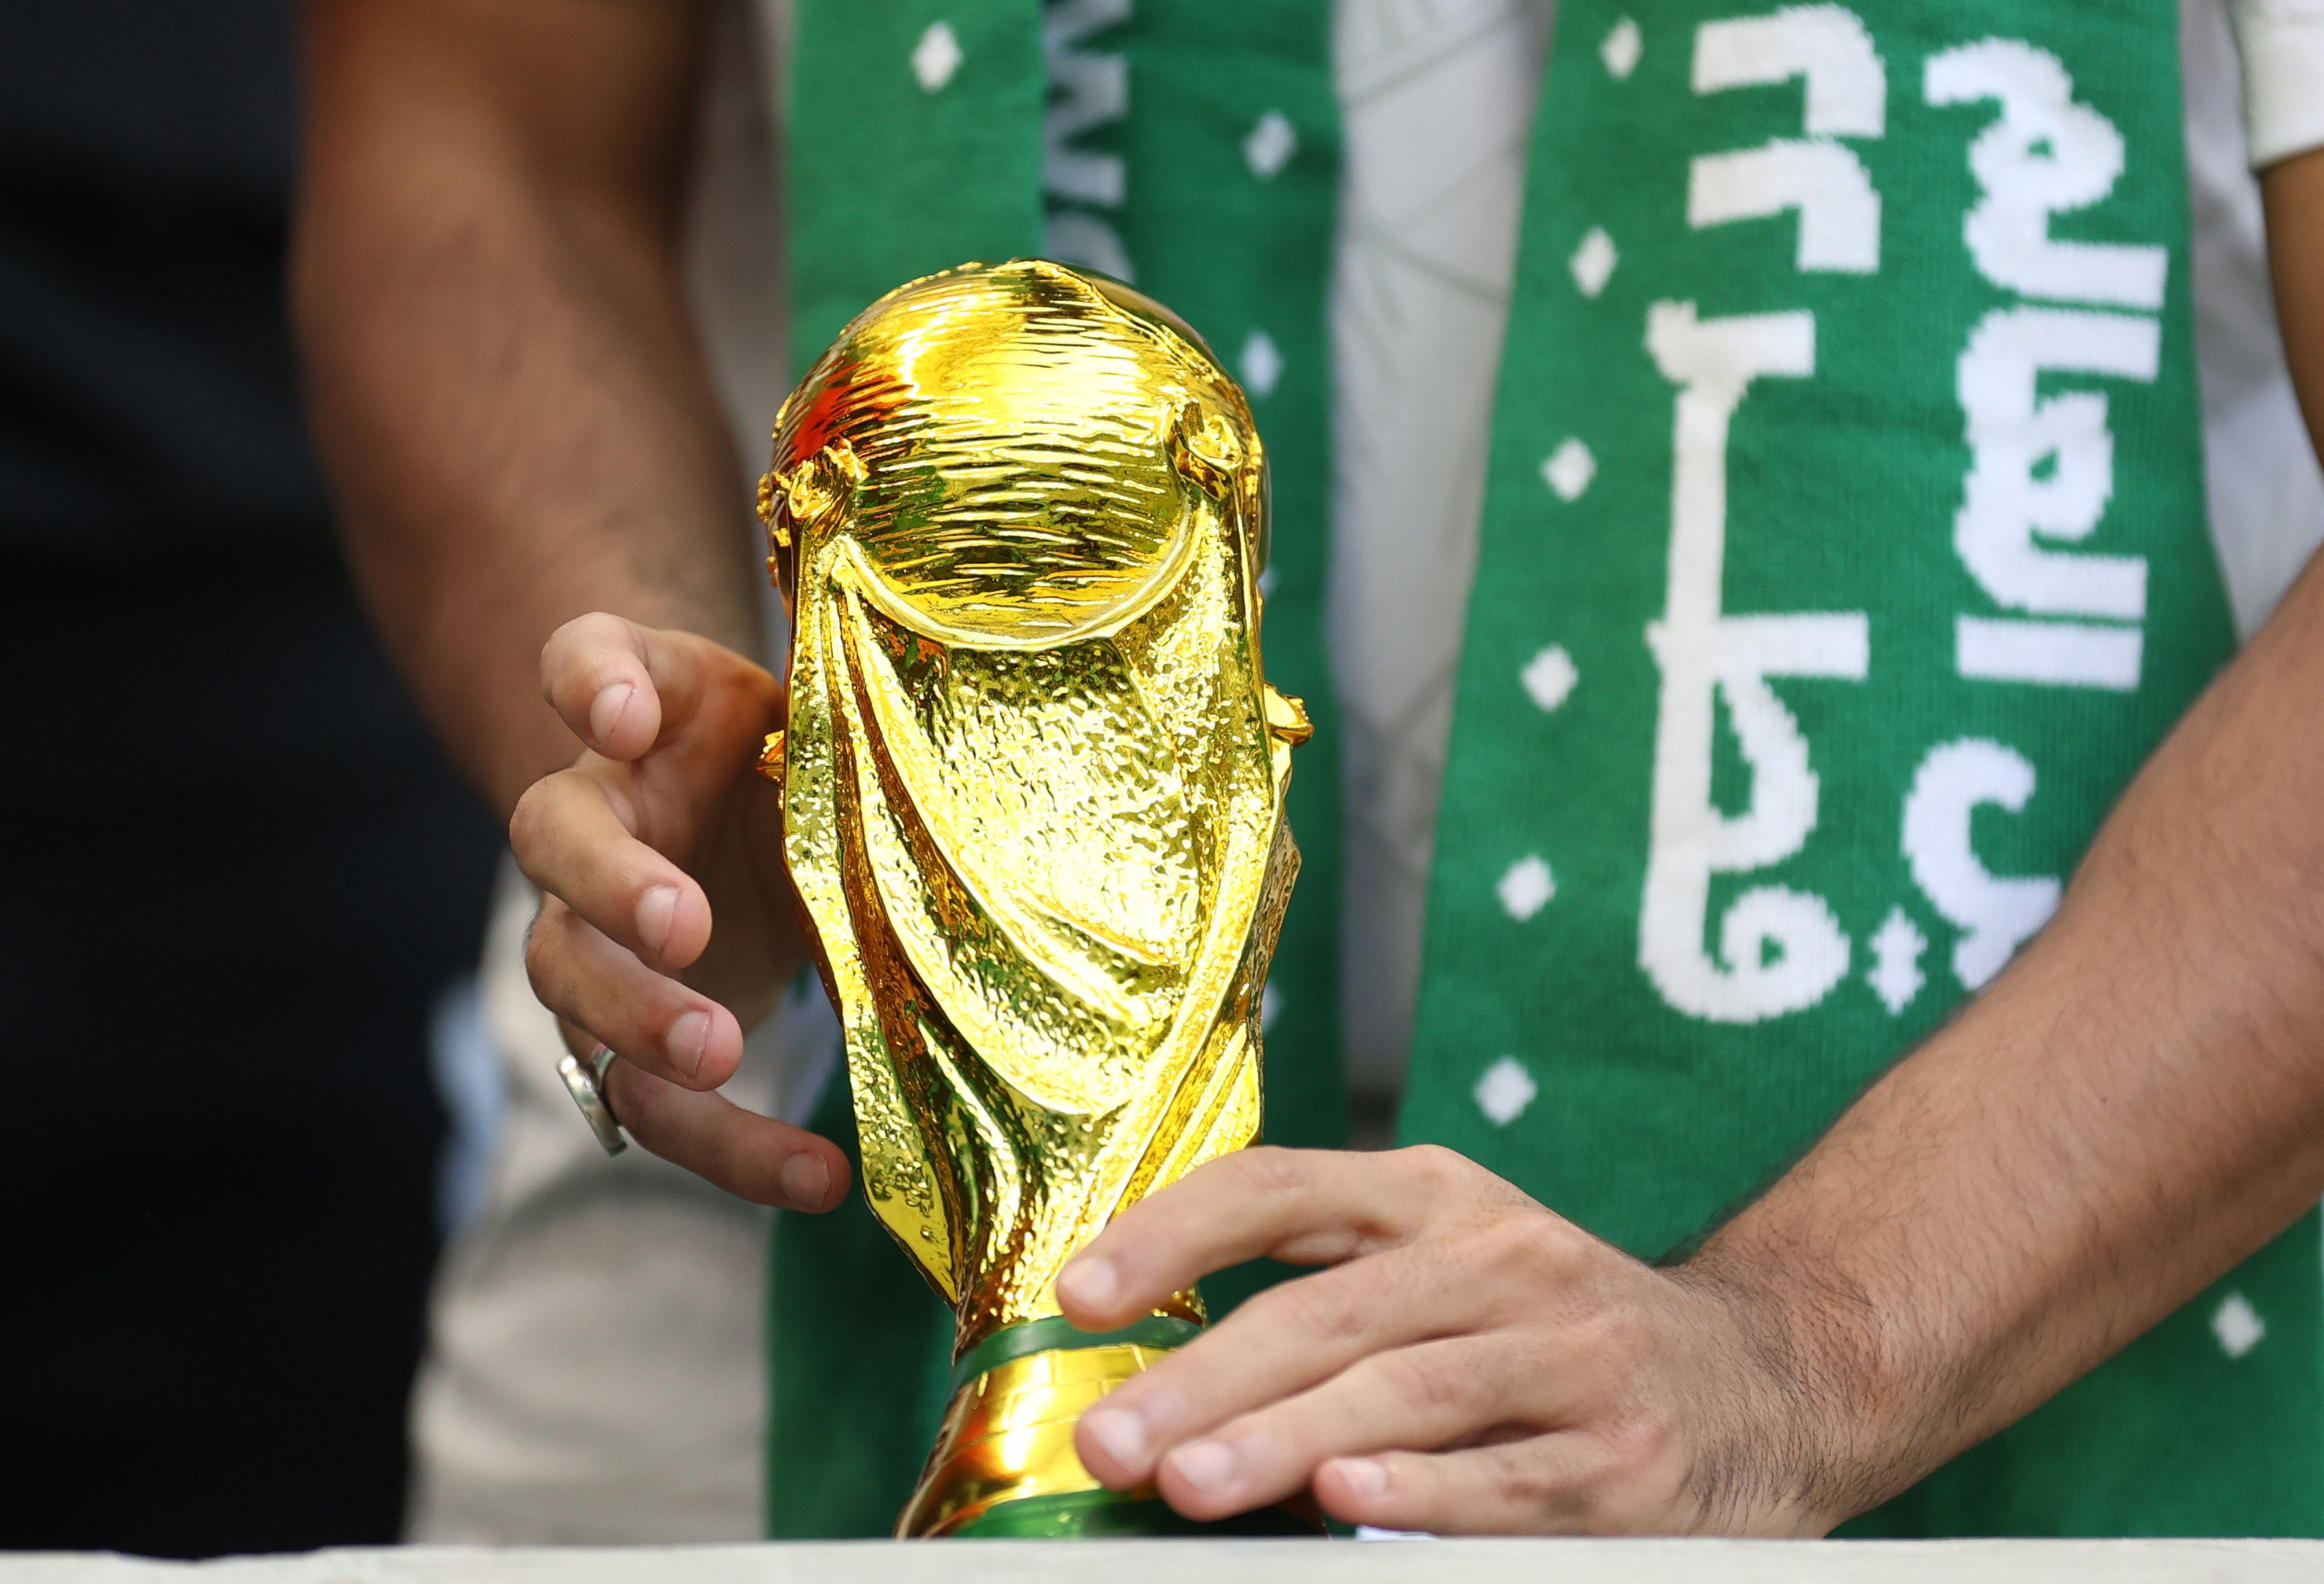 World Cup 2034 set to be held in Saudi Arabia as their only rivals Australia pull out of the bidding